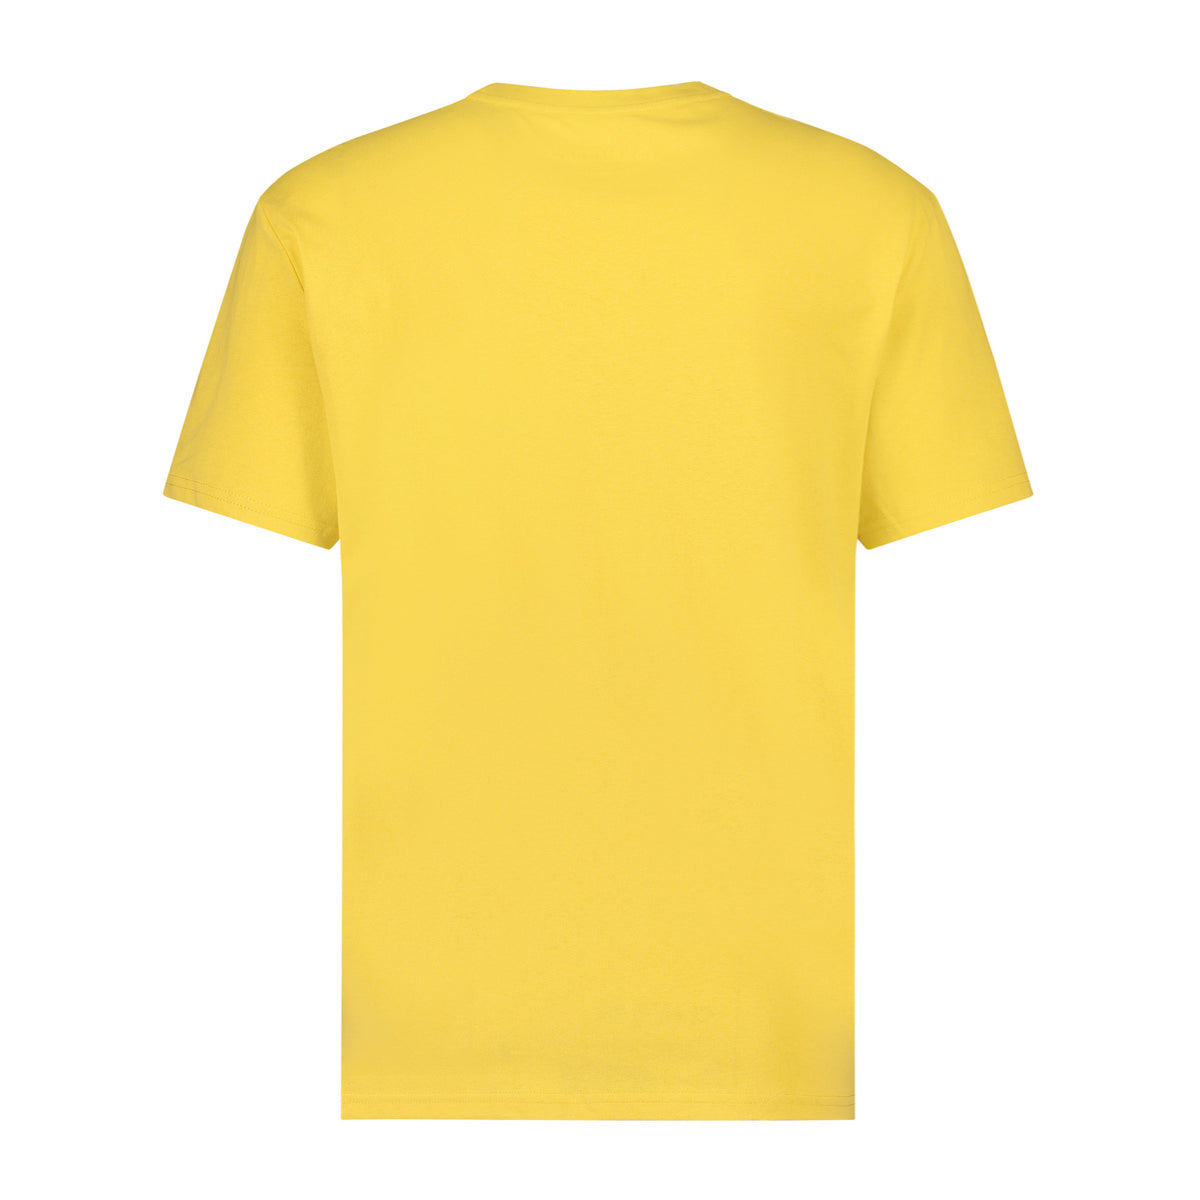 The Analogues | Because the sky is blue T-shirt Yellow | Back